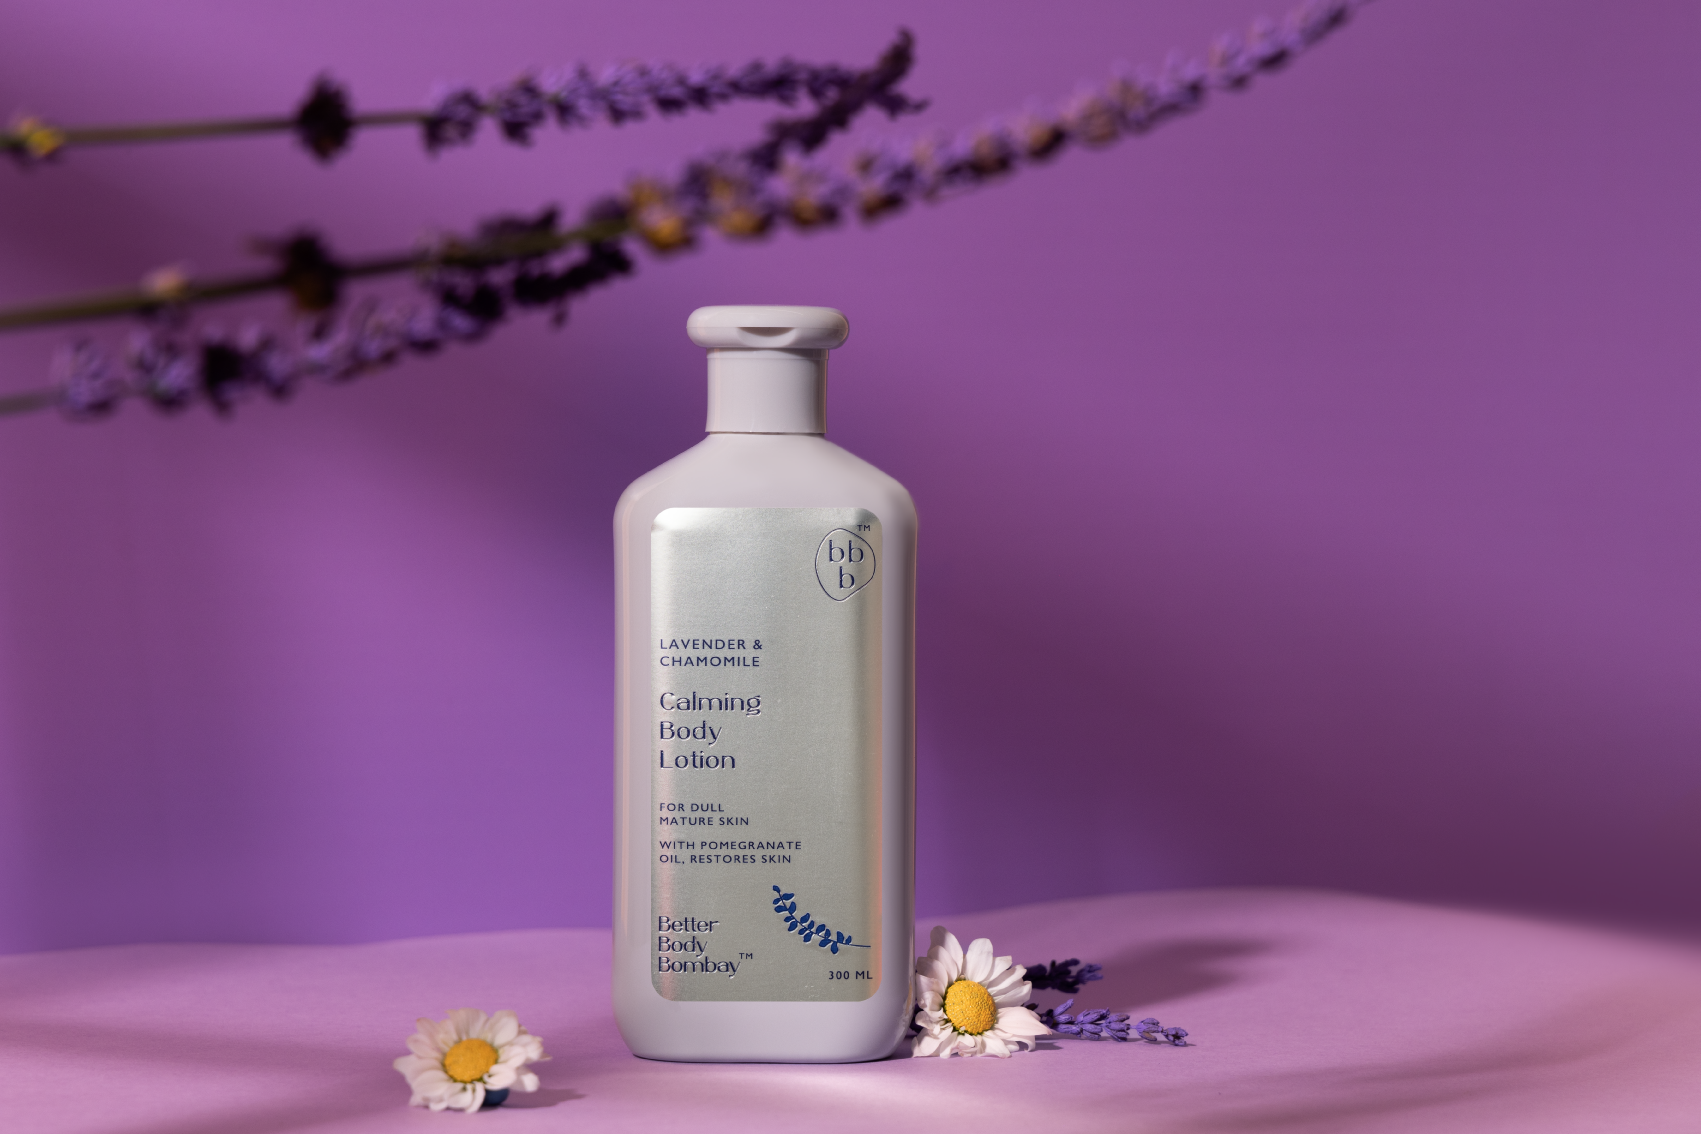 BBB lavender & chamomile calming body lotion